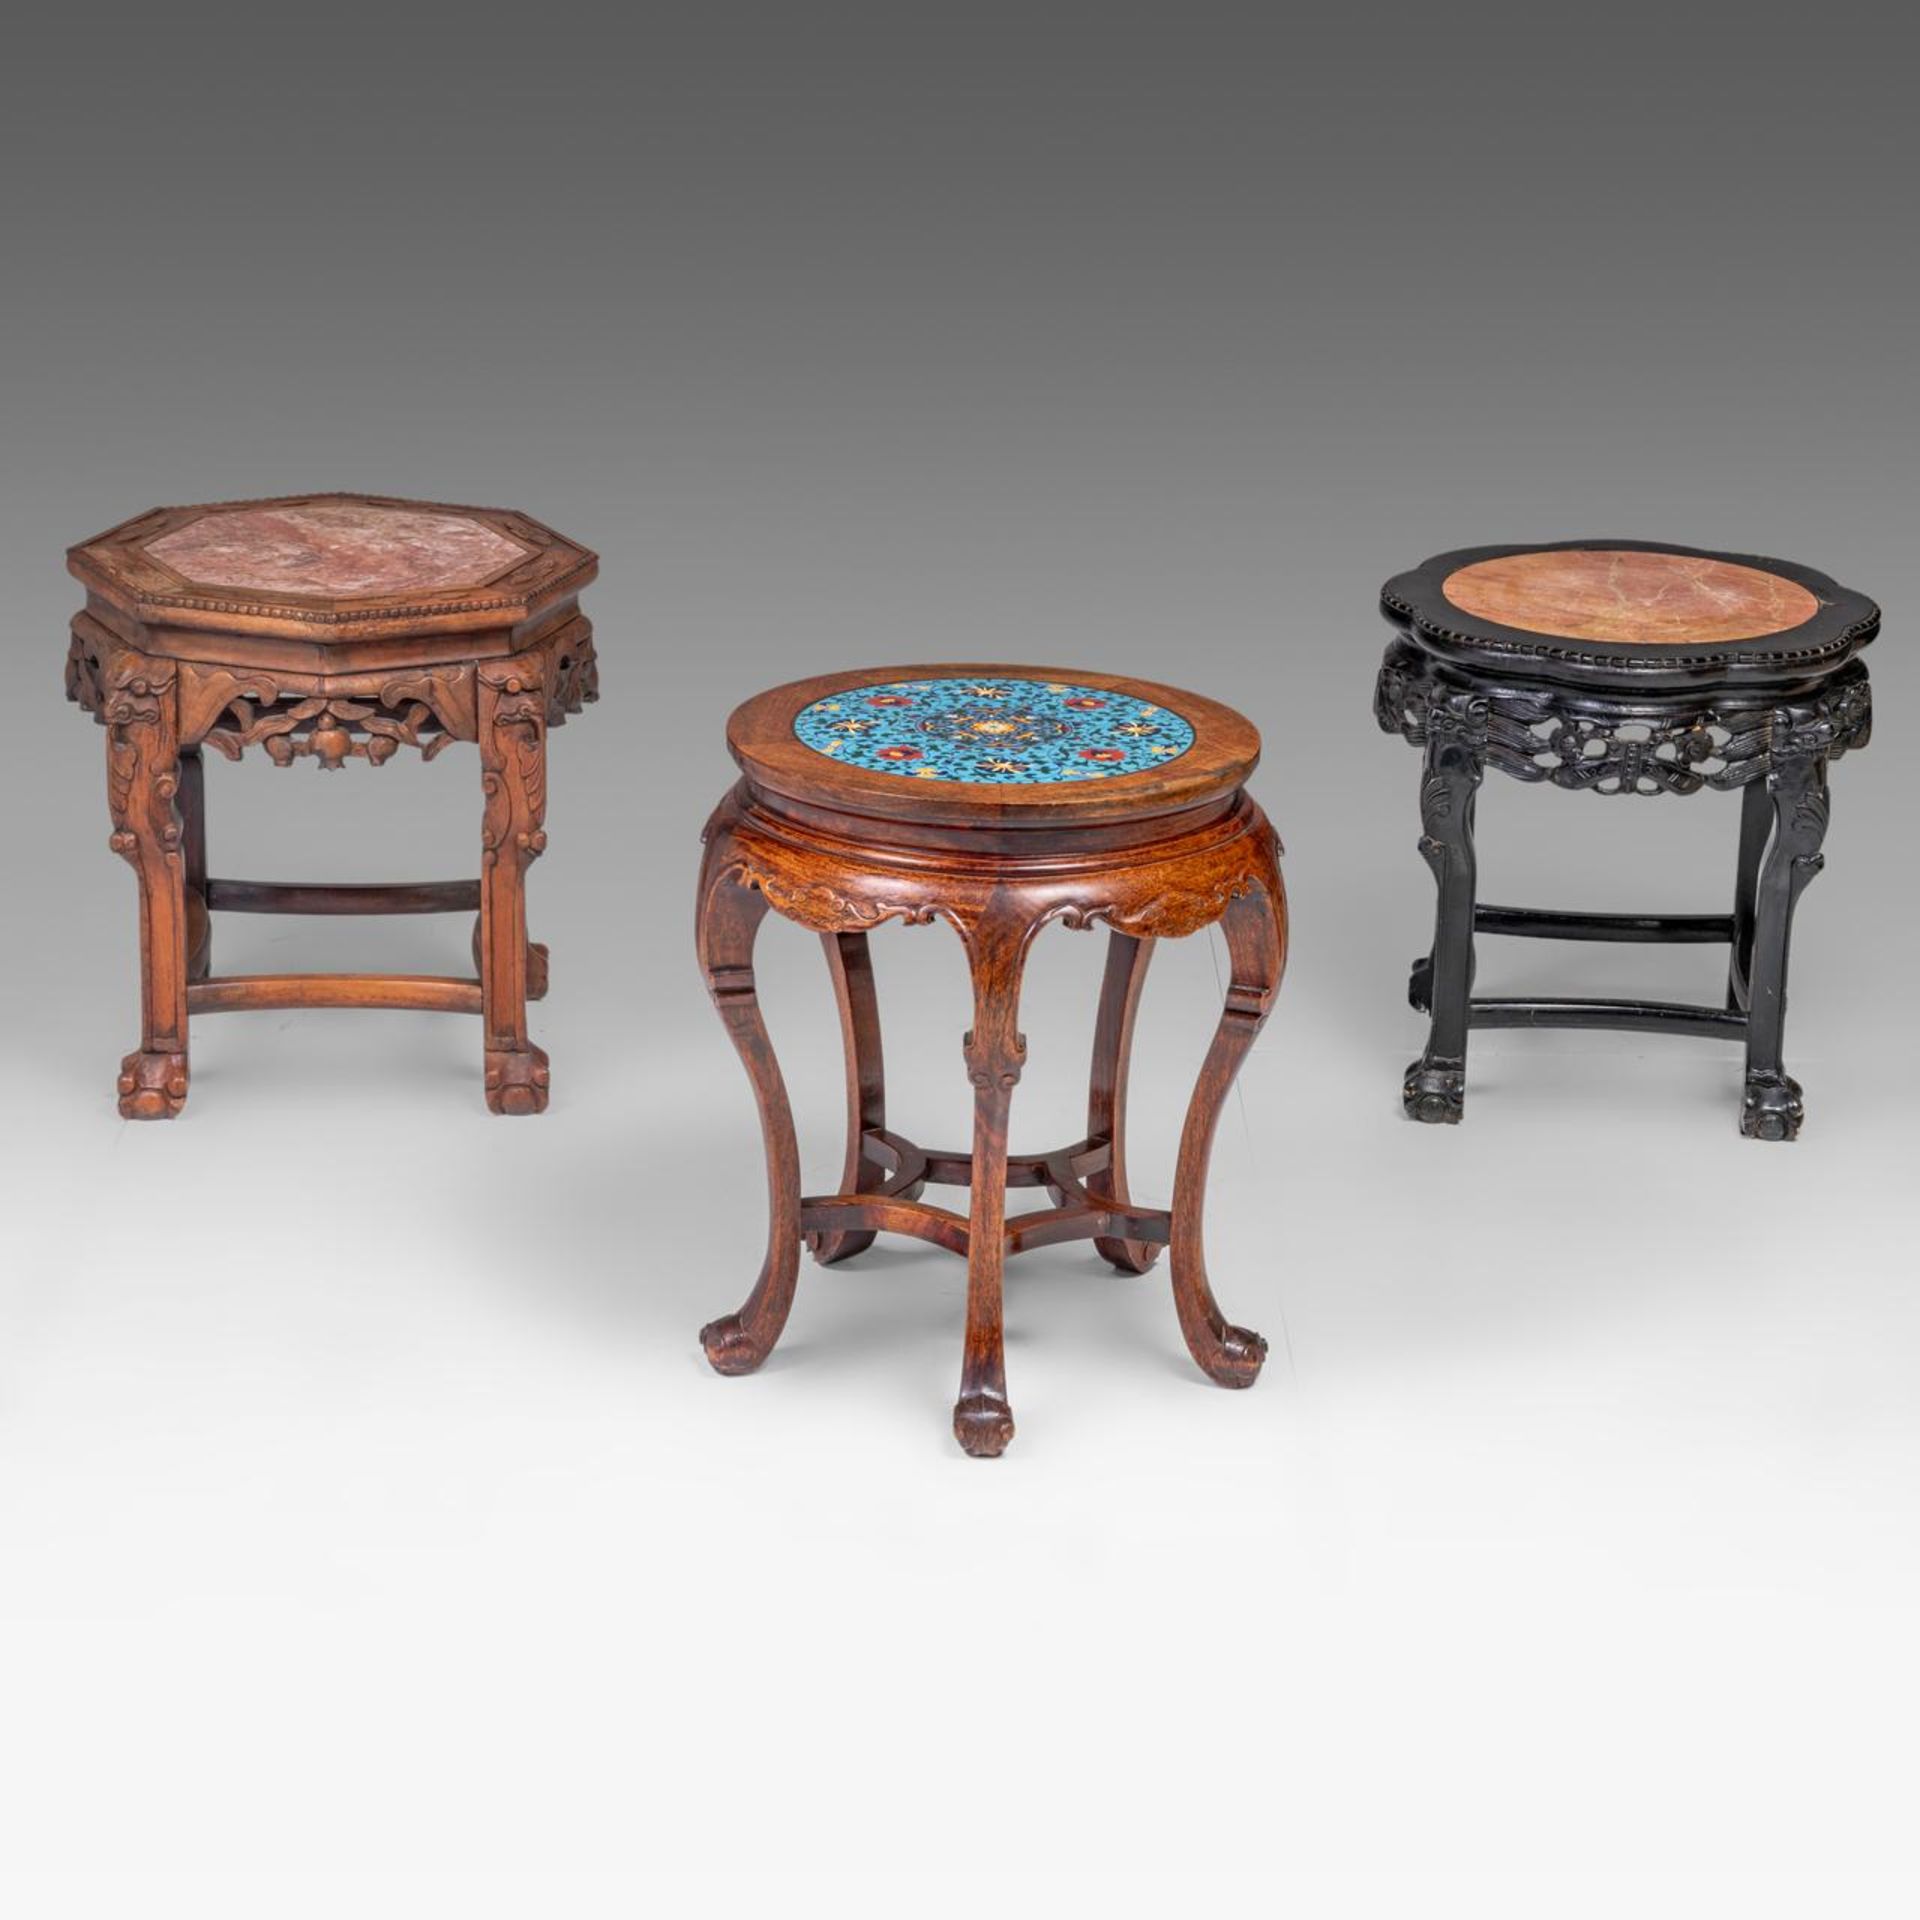 Three Chinese carved hardwood bases, two including a marble top, one with a cloisonne enamelled plaq